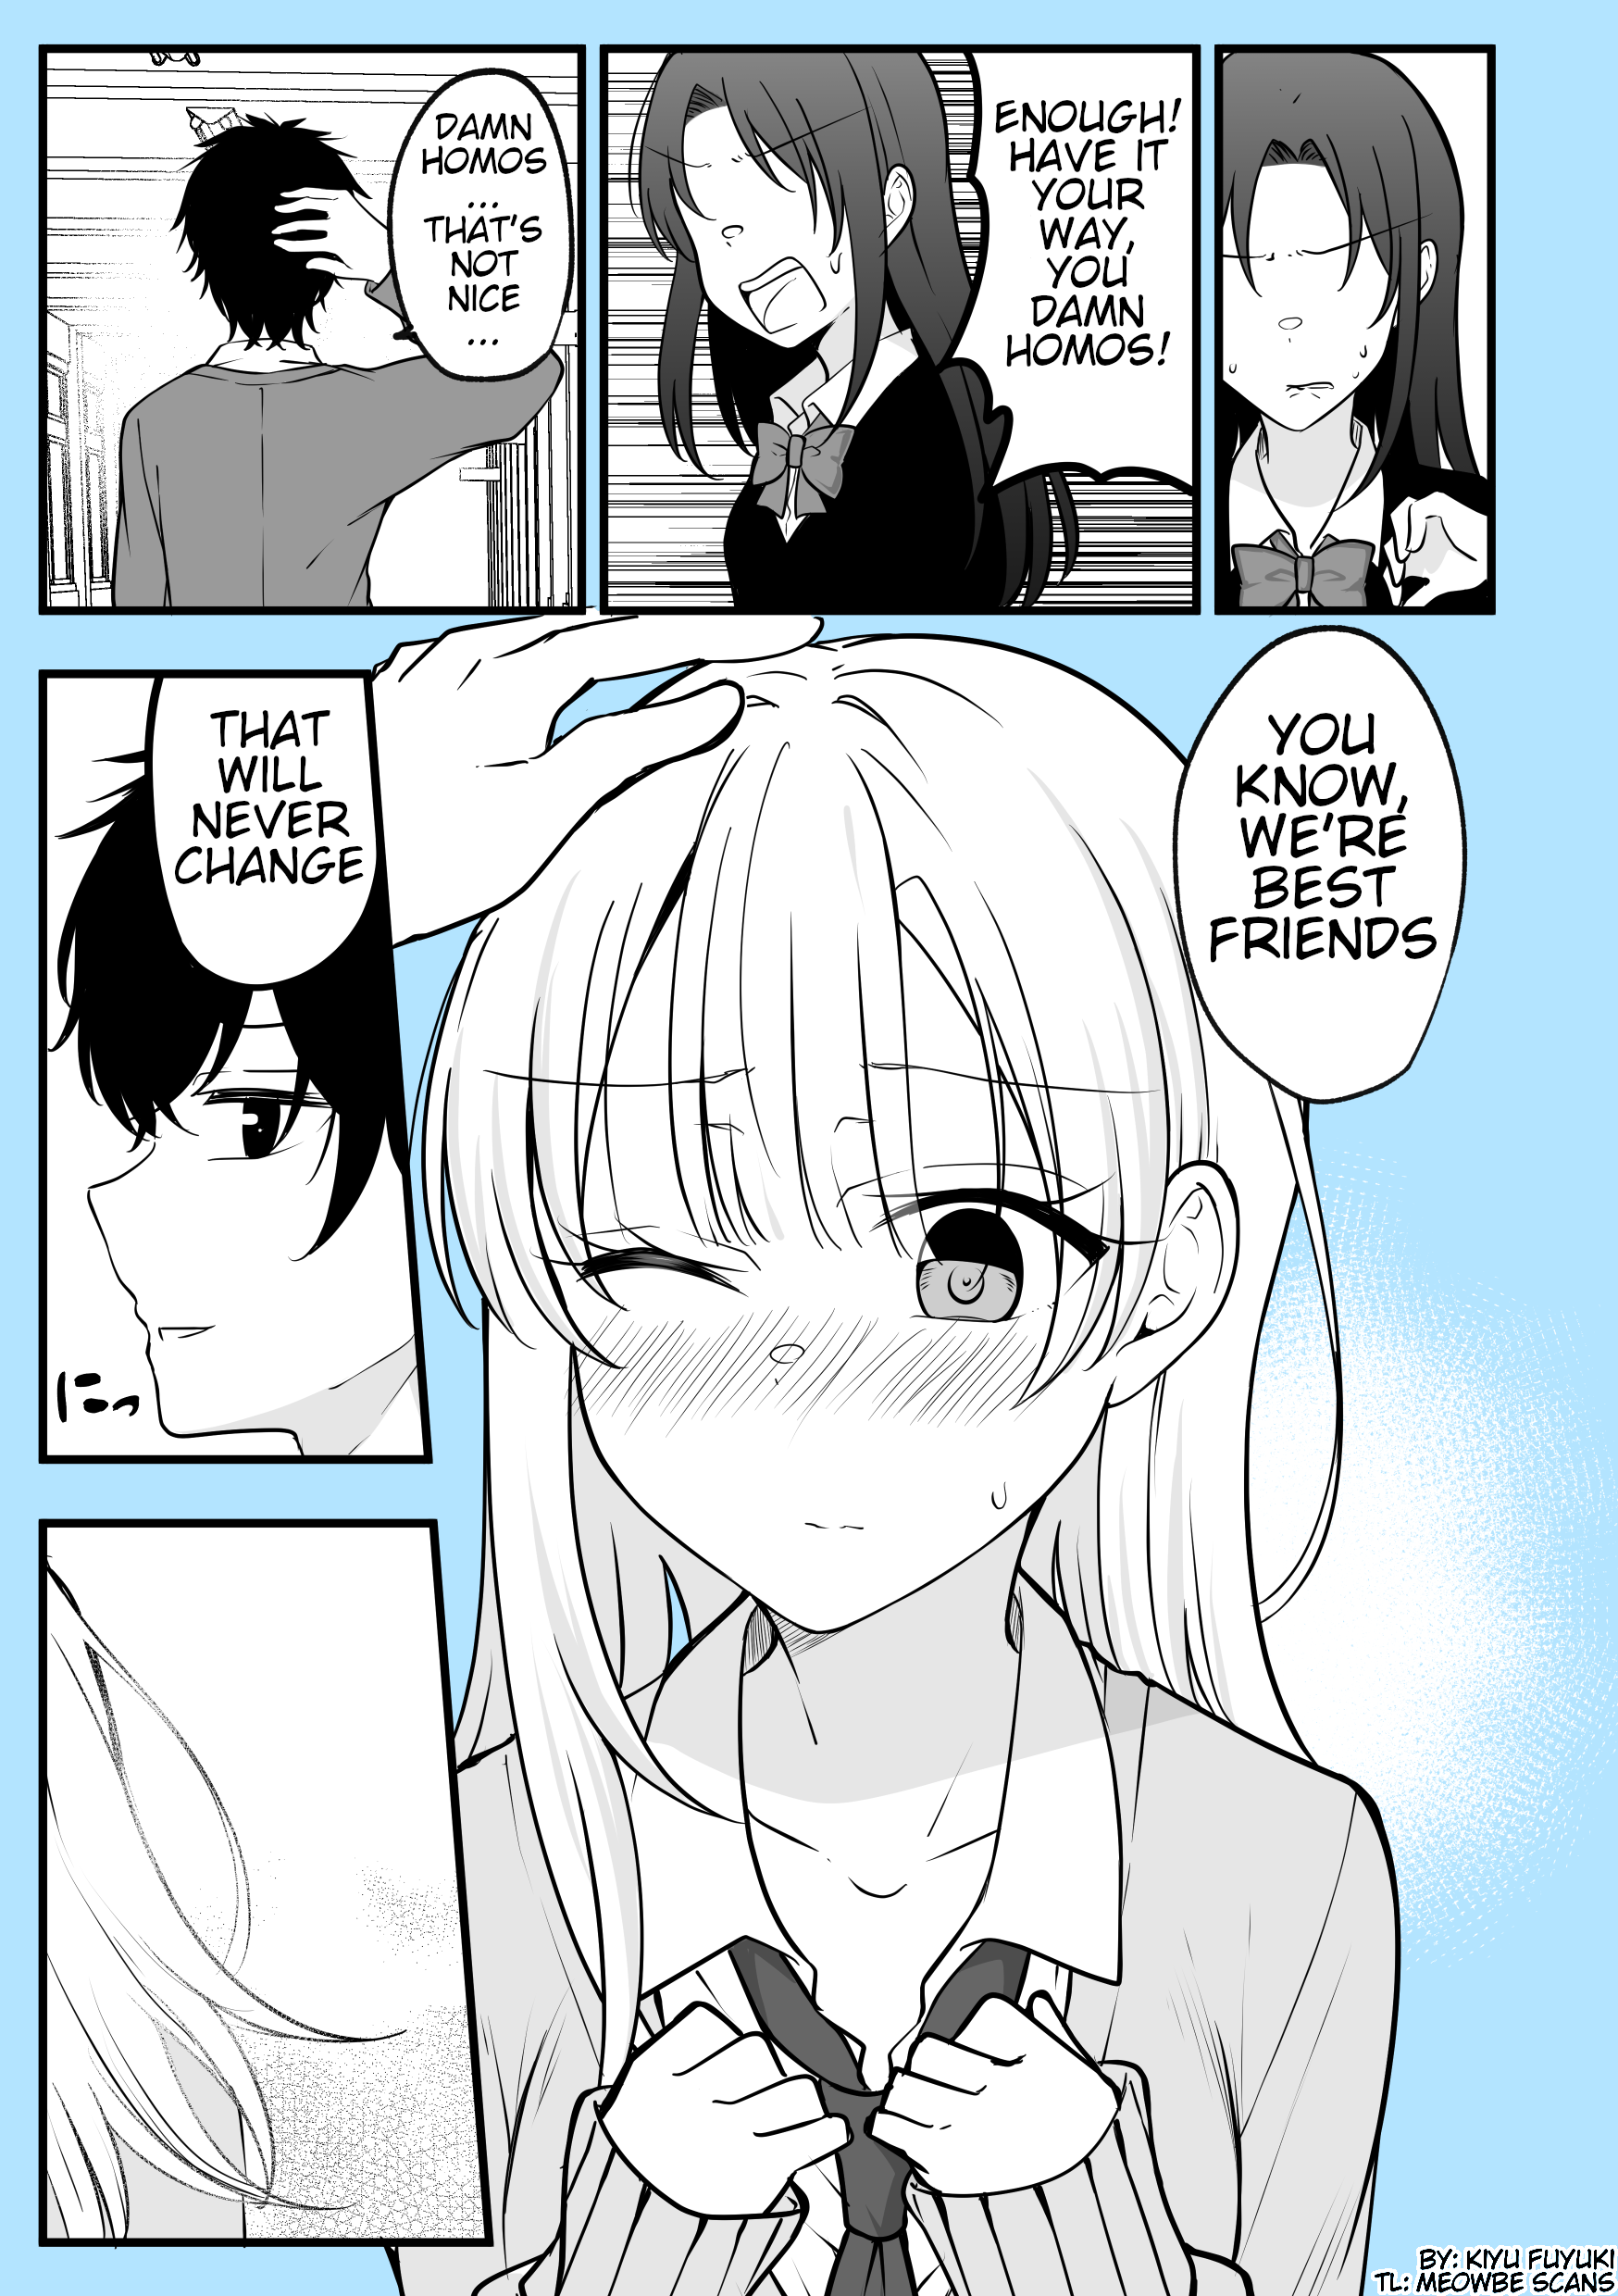 Until My Best Friend Who Became A Girl One Day Becomes Happy - Page 1